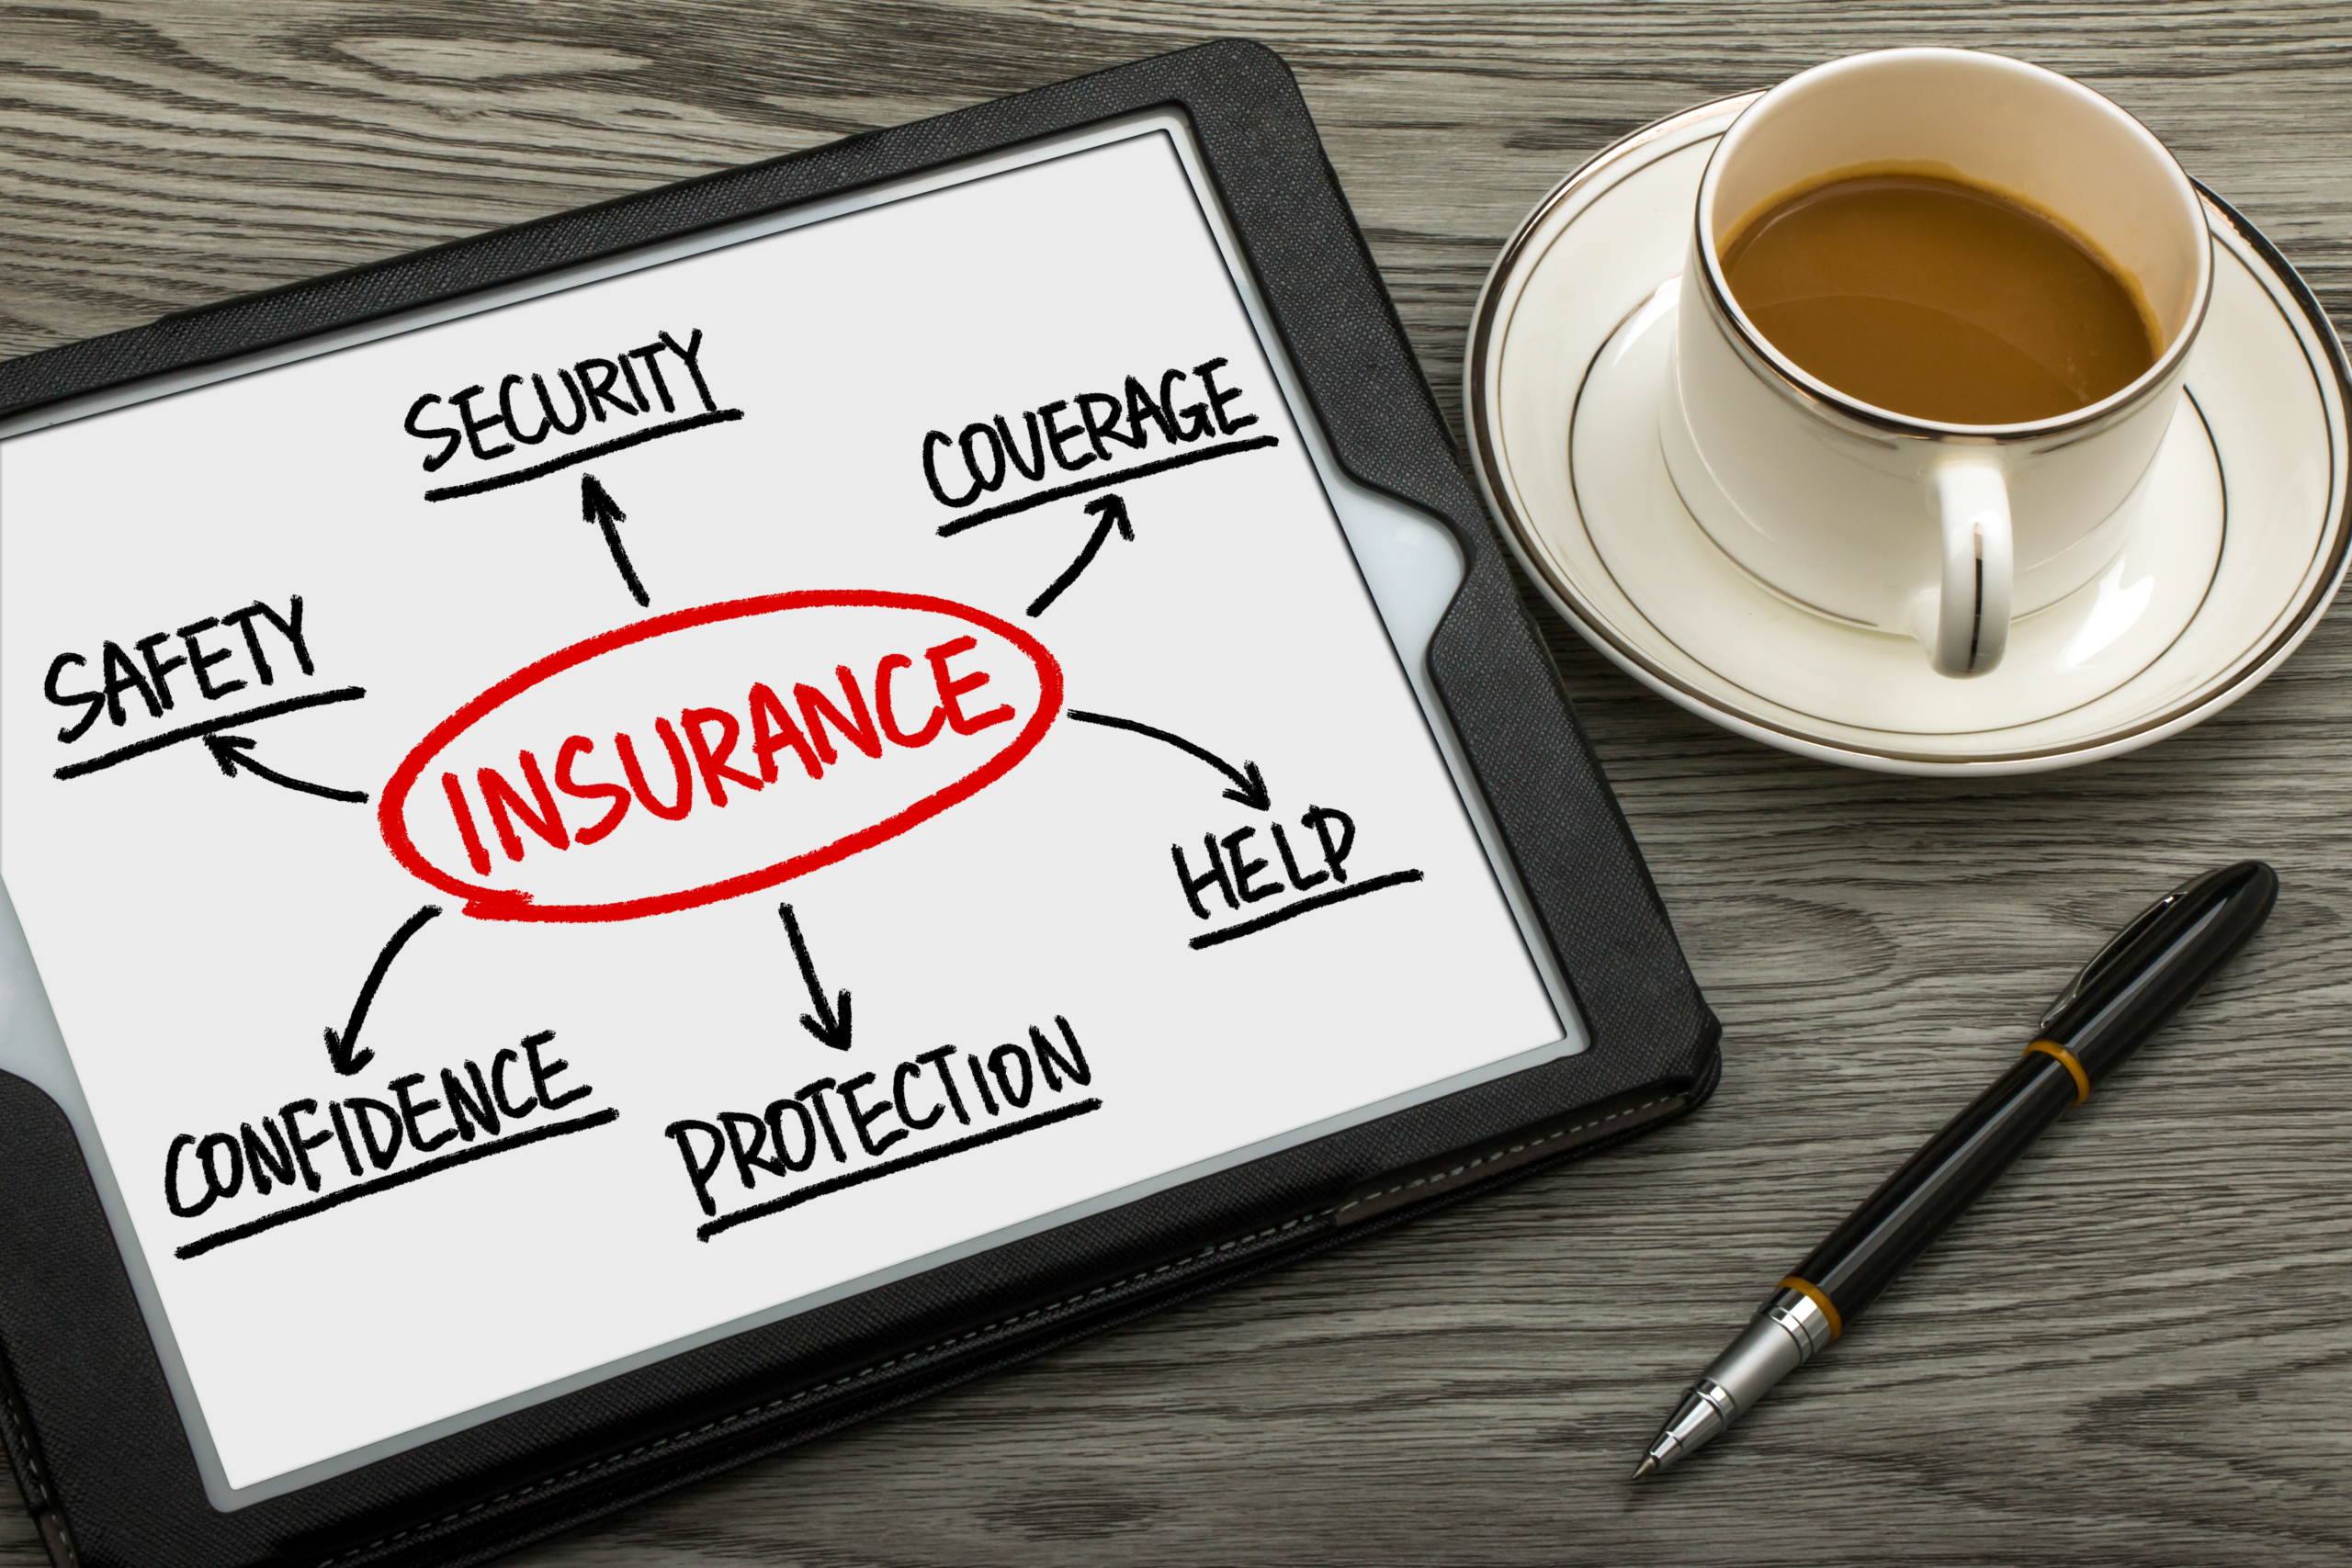 Featured Image for post: 5 Types of Insurance You Might Not Know About